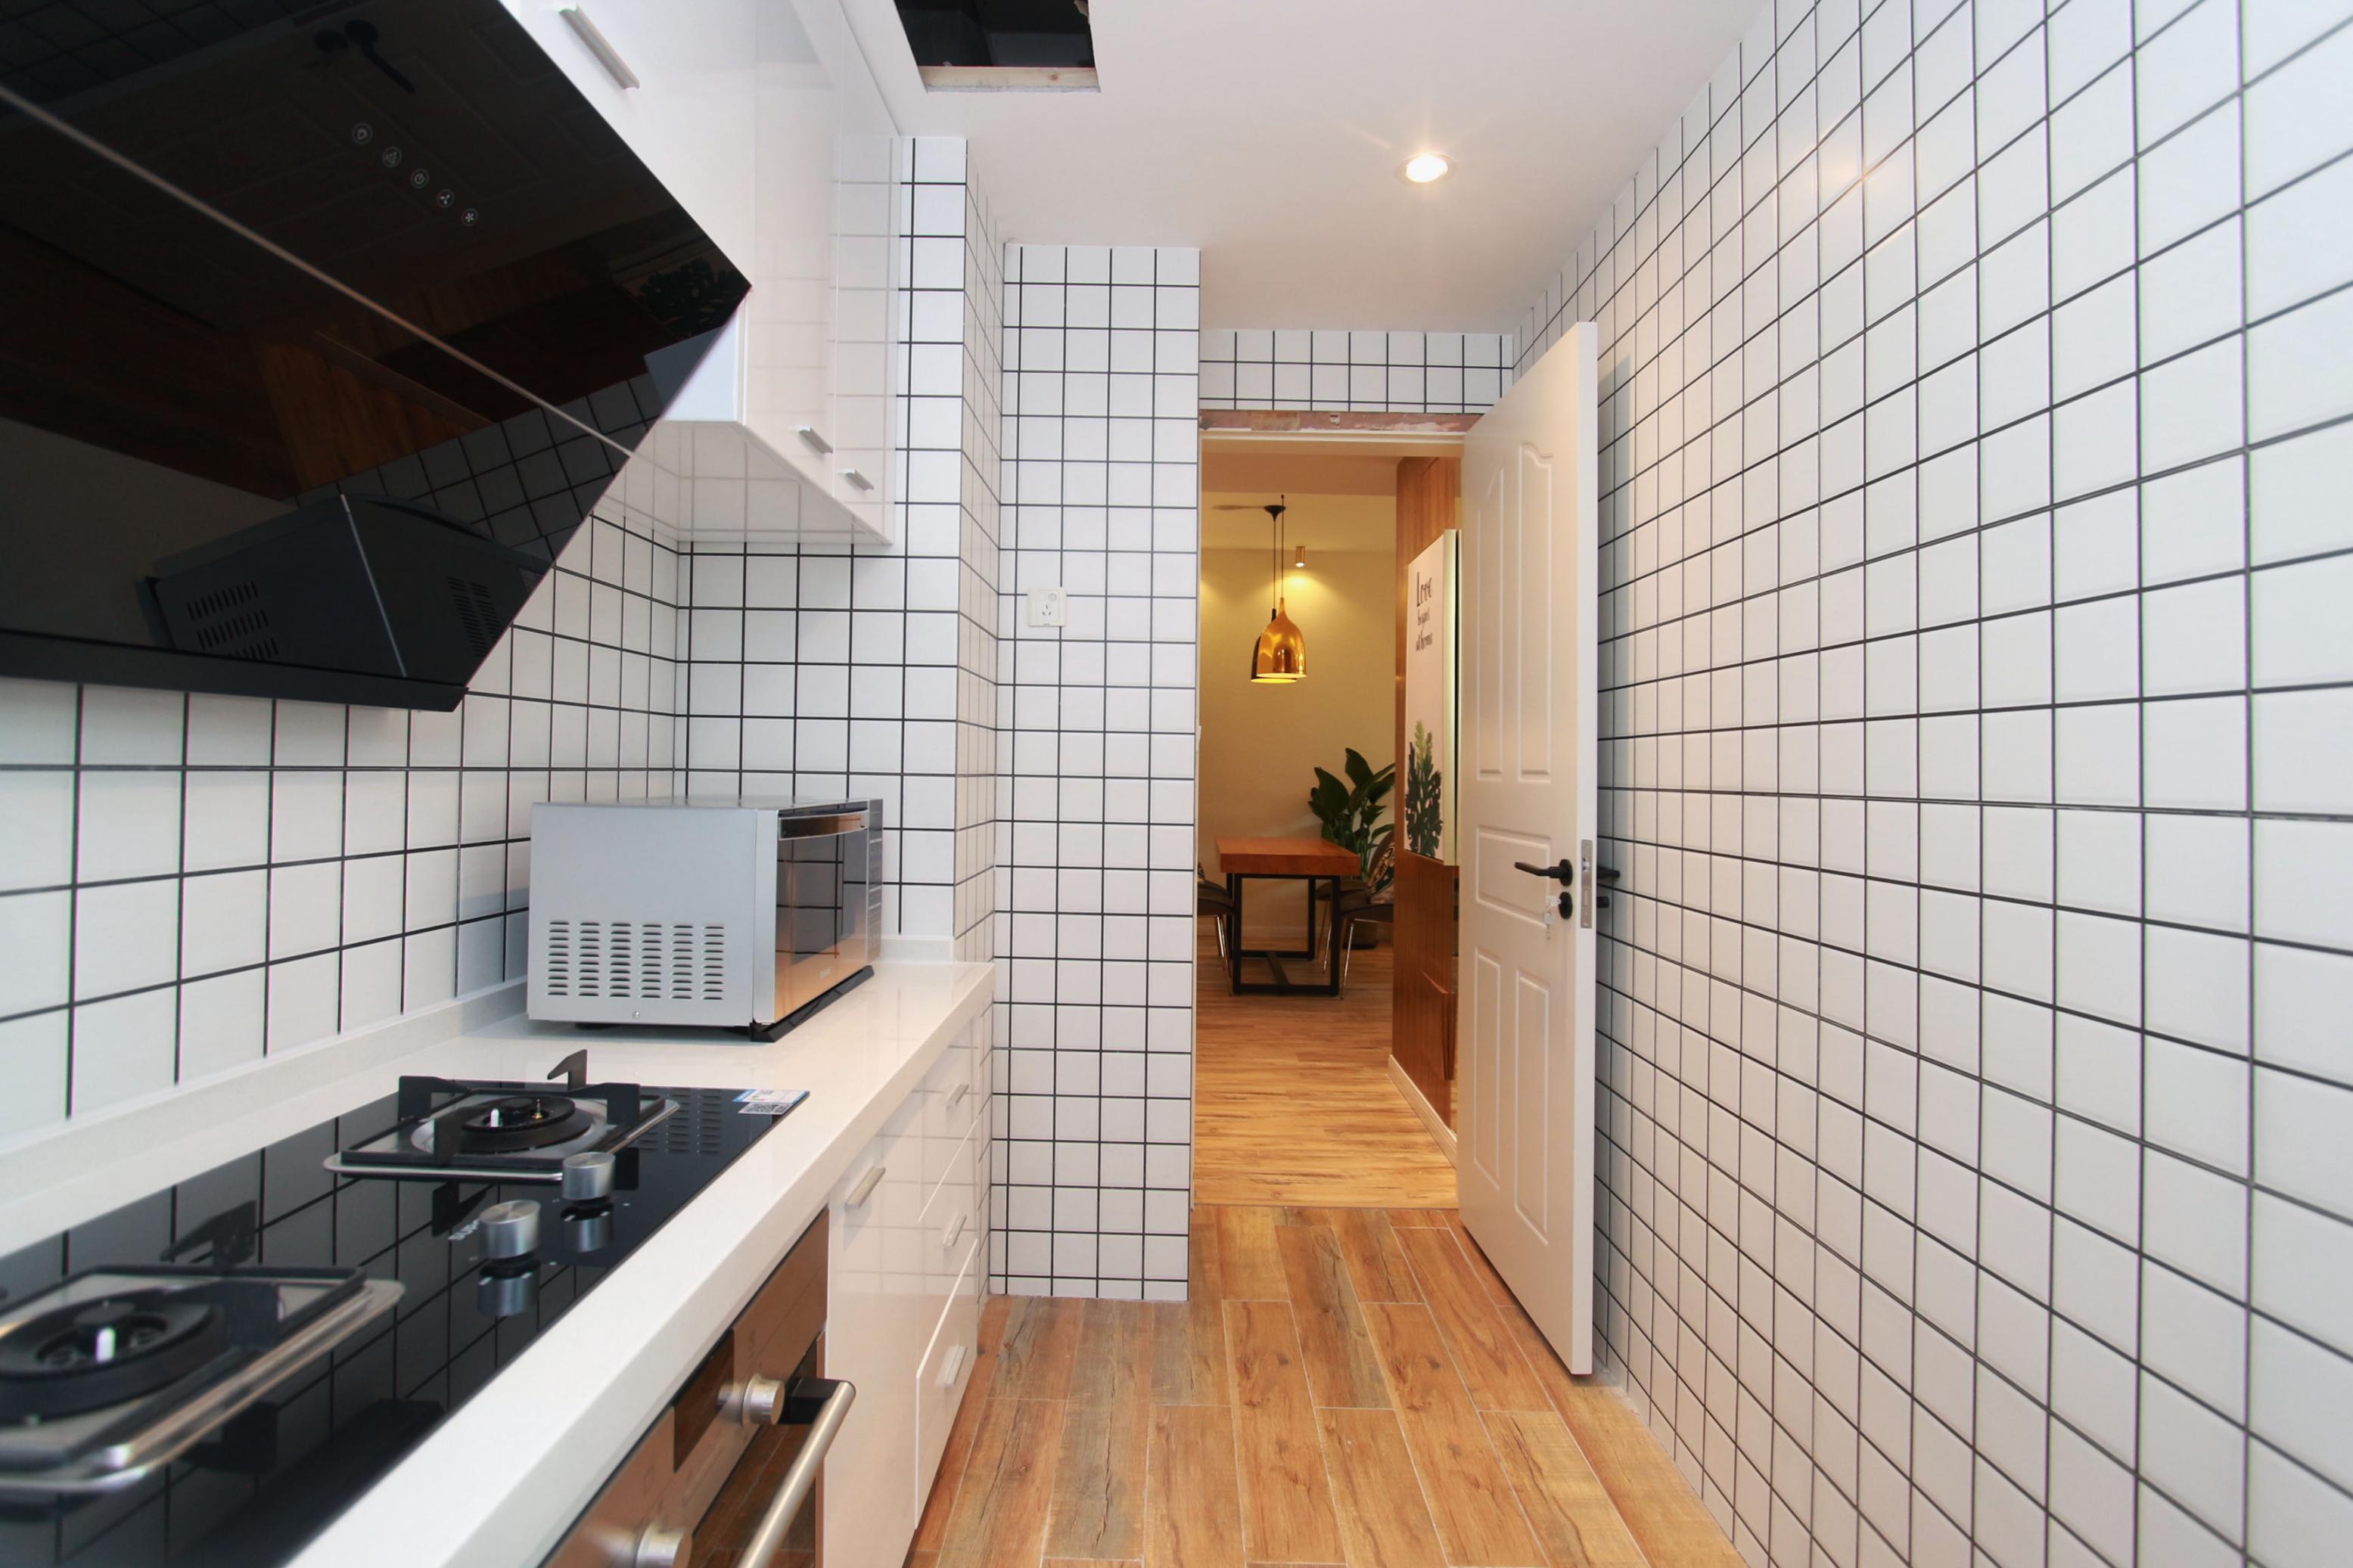 large kitchen Renovated Modern High-end Ladoll 1BR Apt LN 2/12/13 for Rent in Shanghai